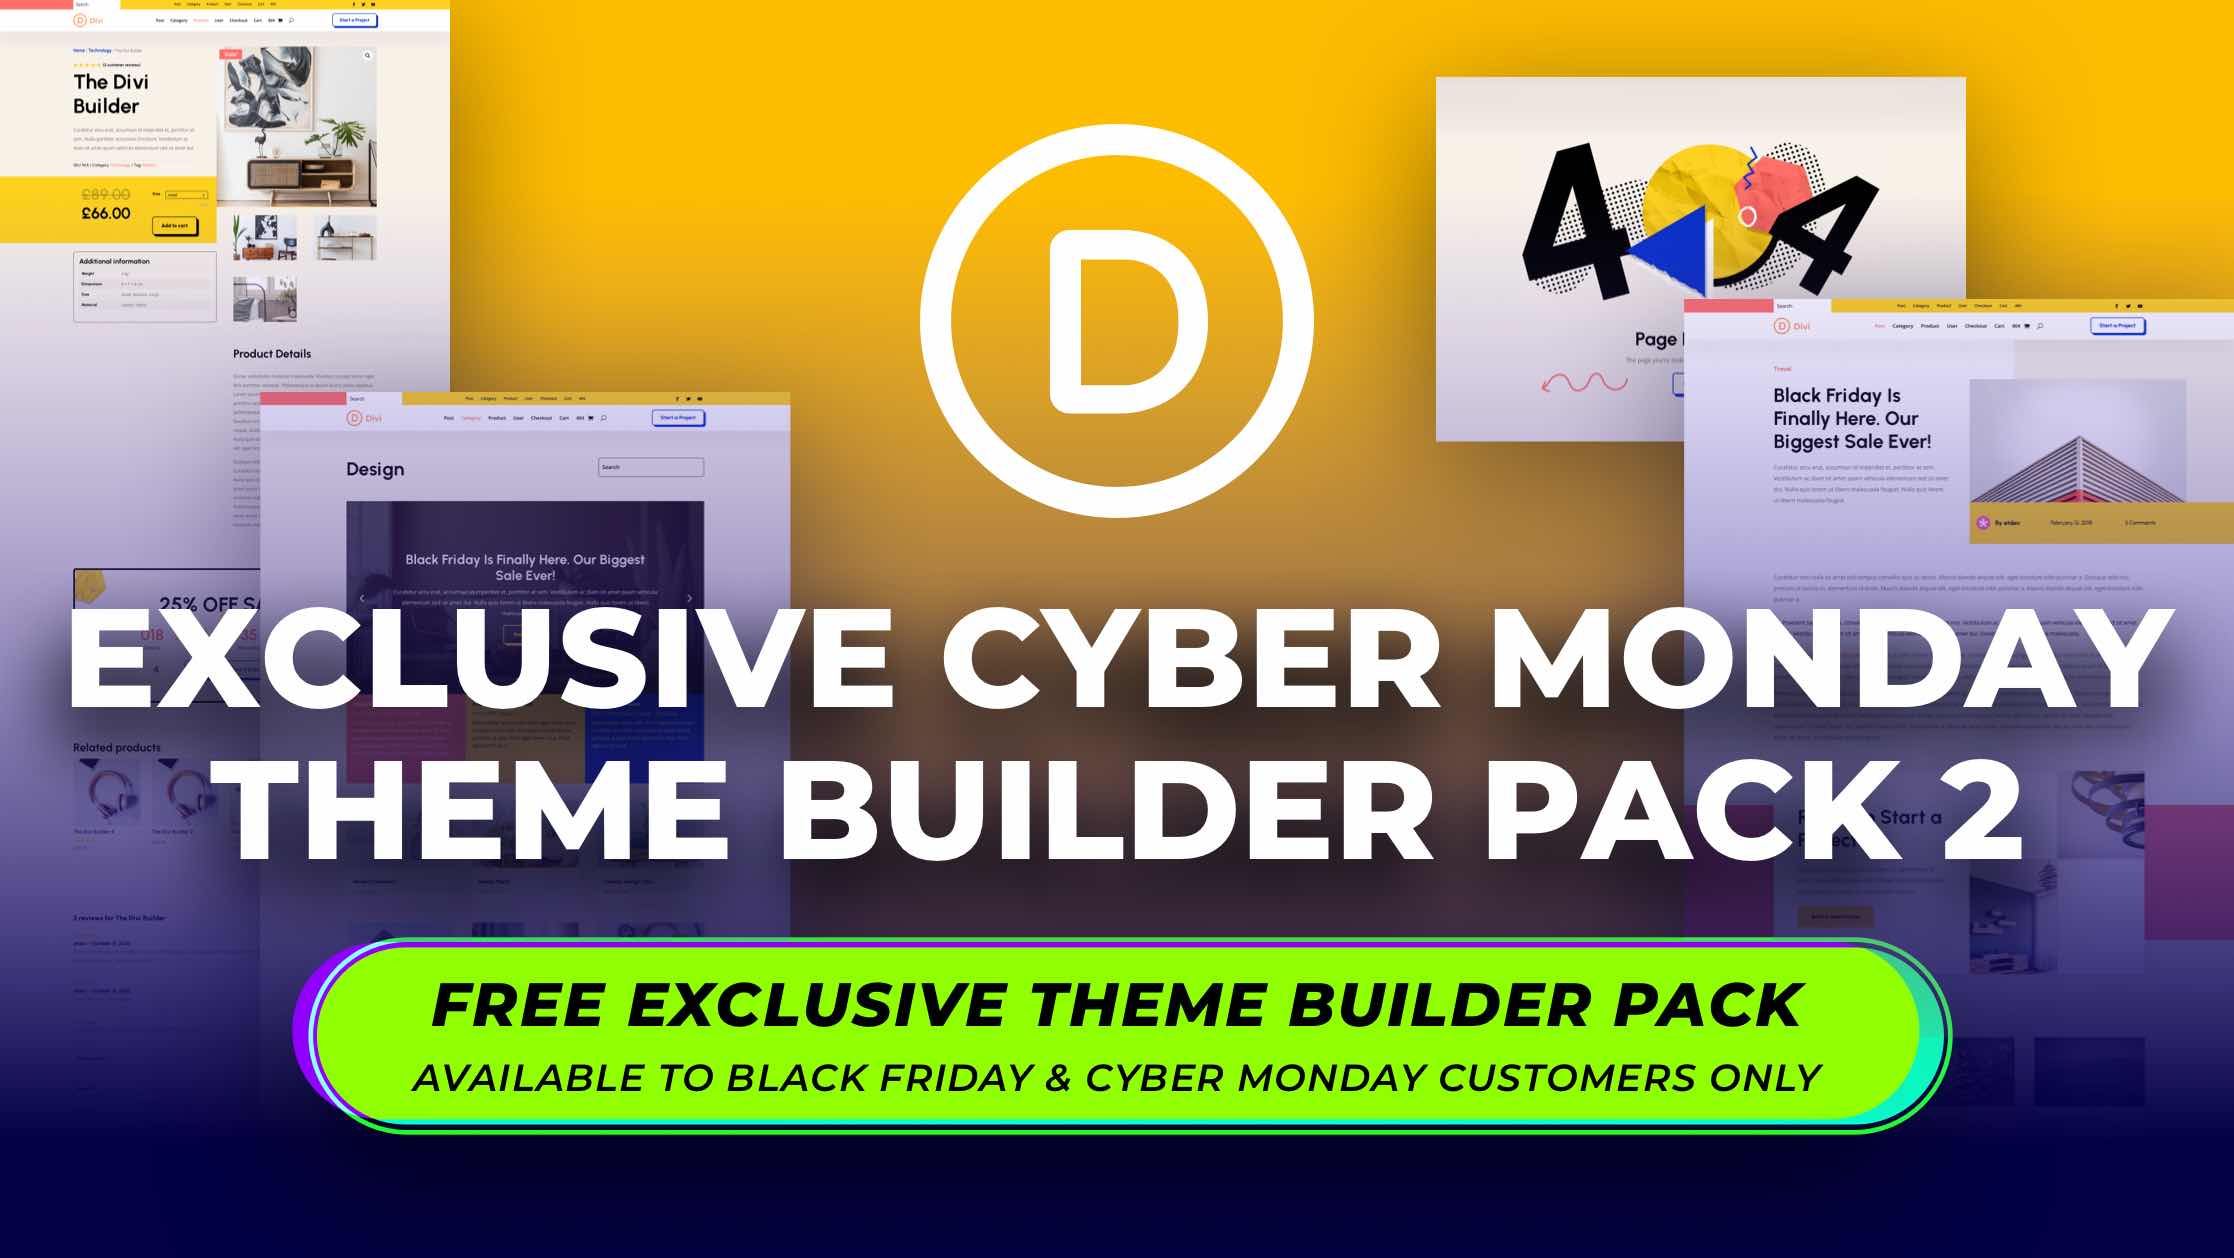 Get the Exclusive FREE Cyber Monday Theme Builder Pack #2